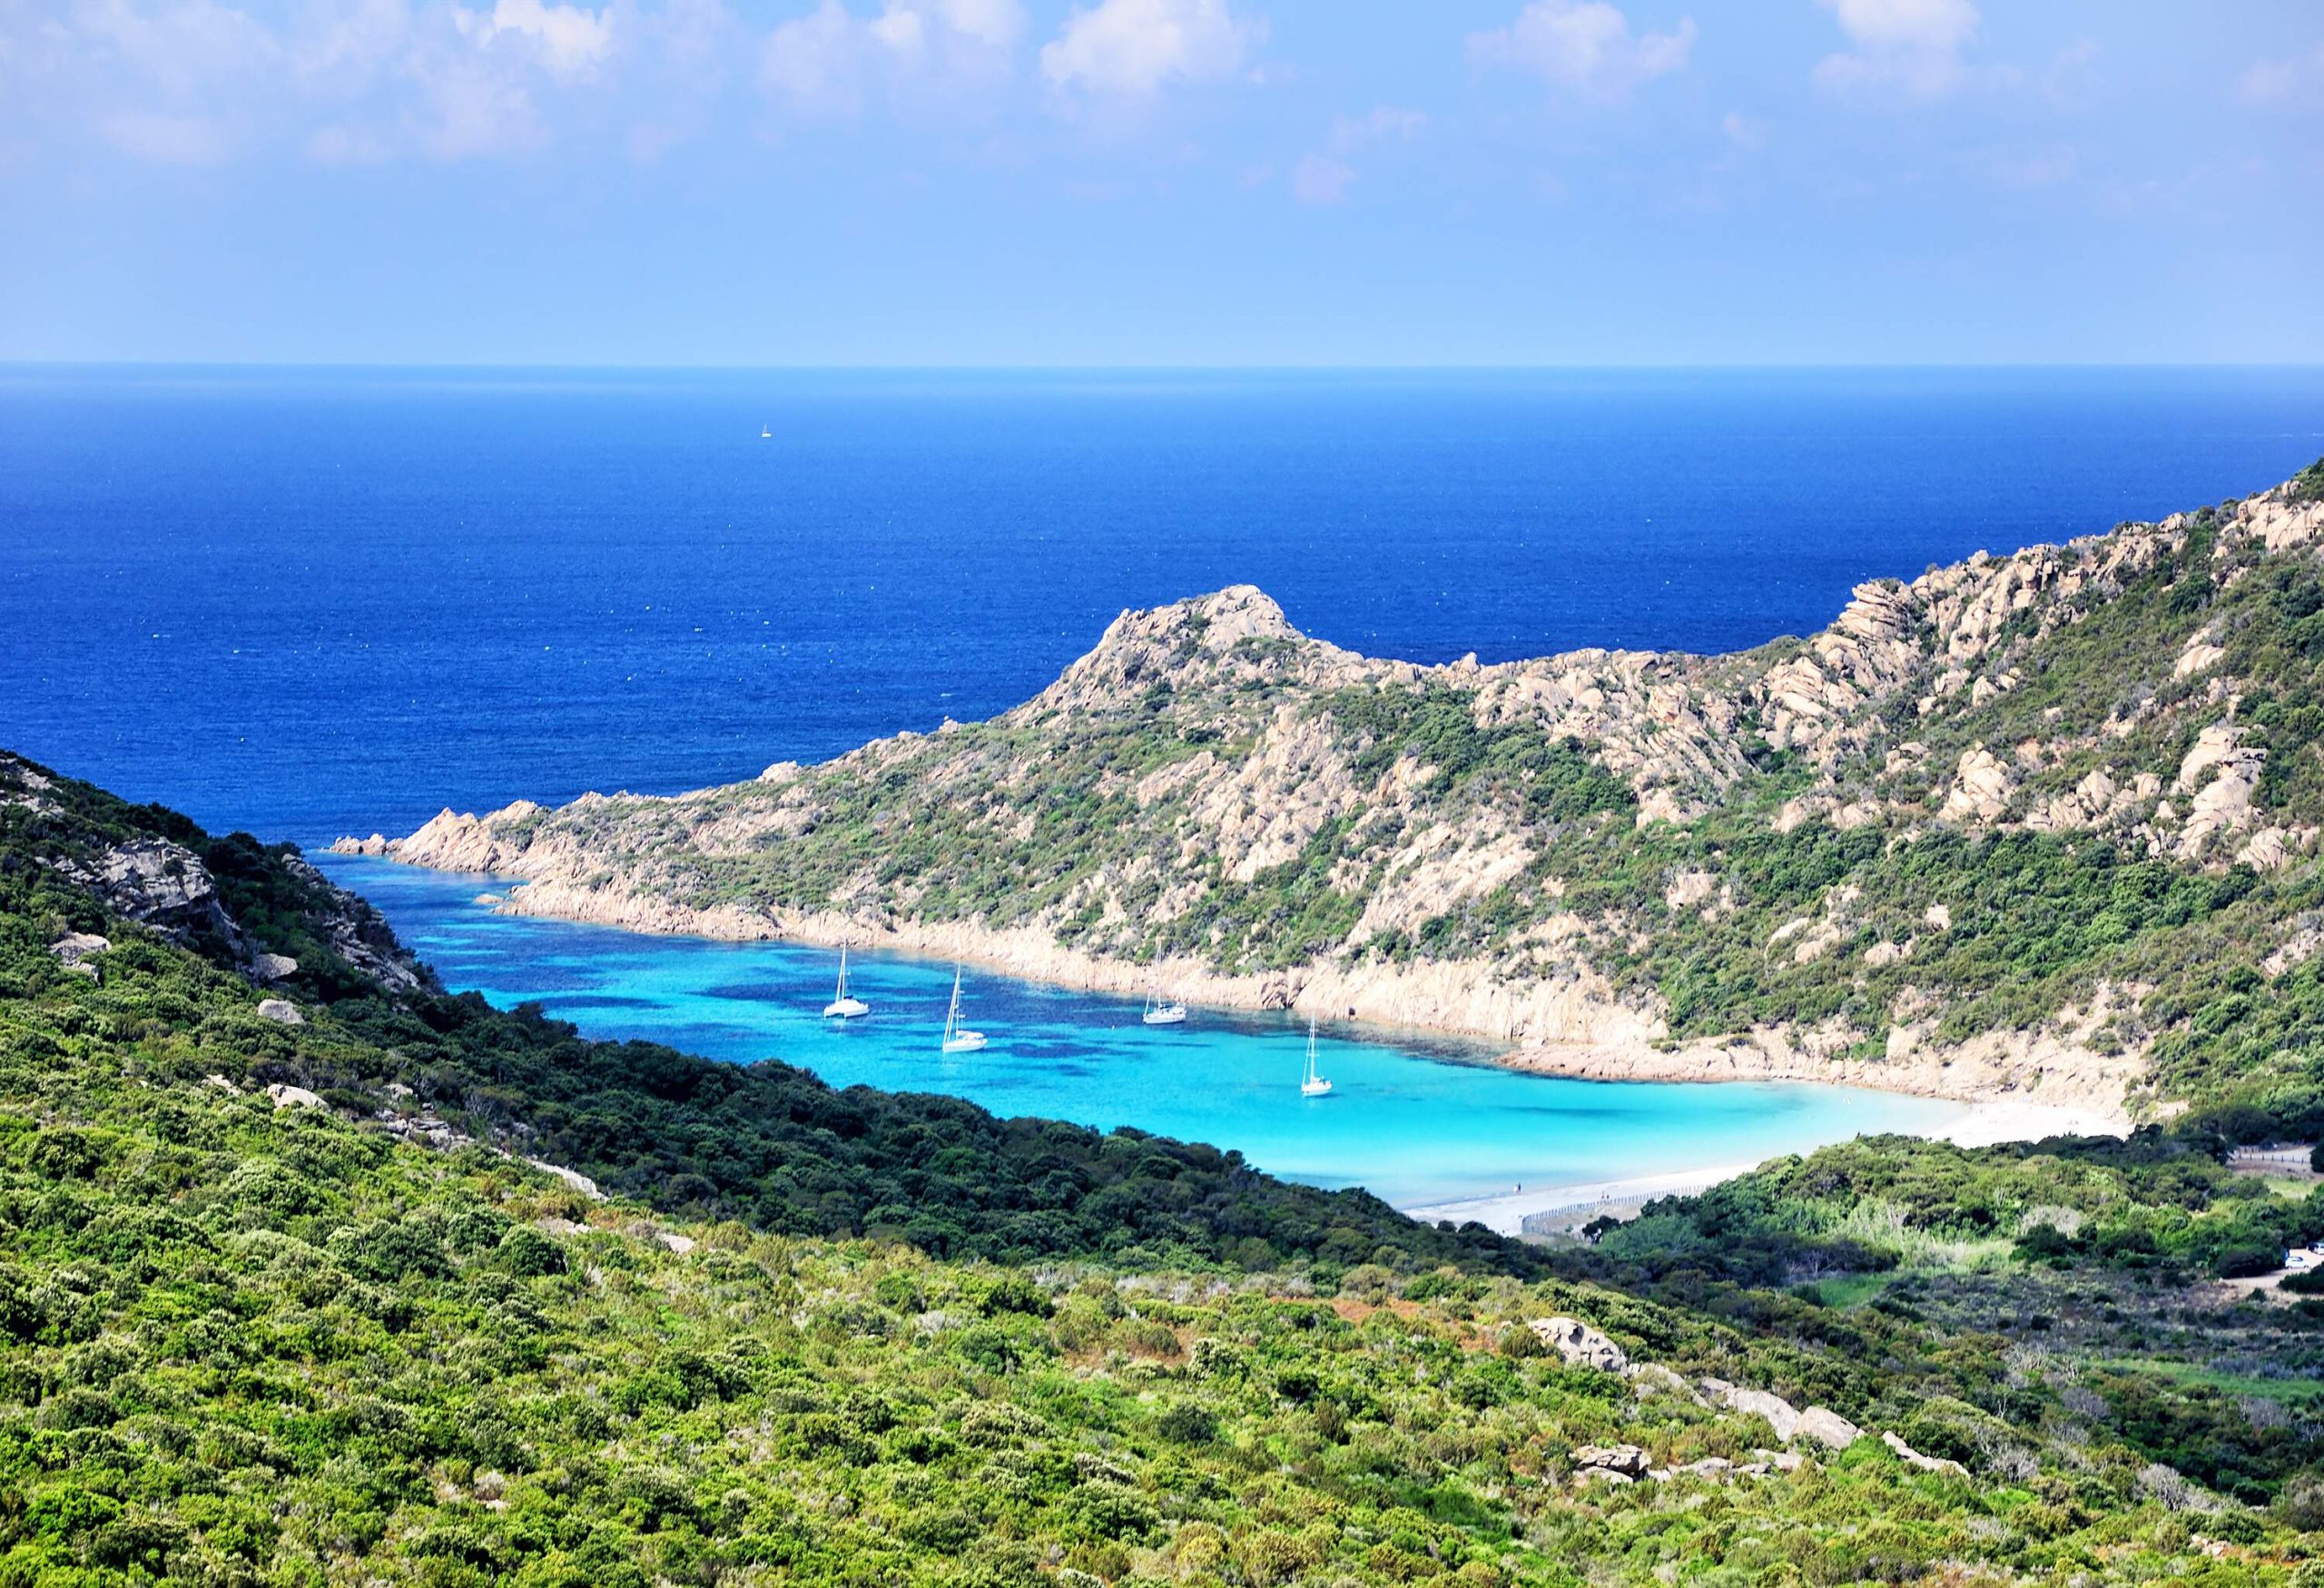 A bay with cruising sailboats bordered by rugged hills.